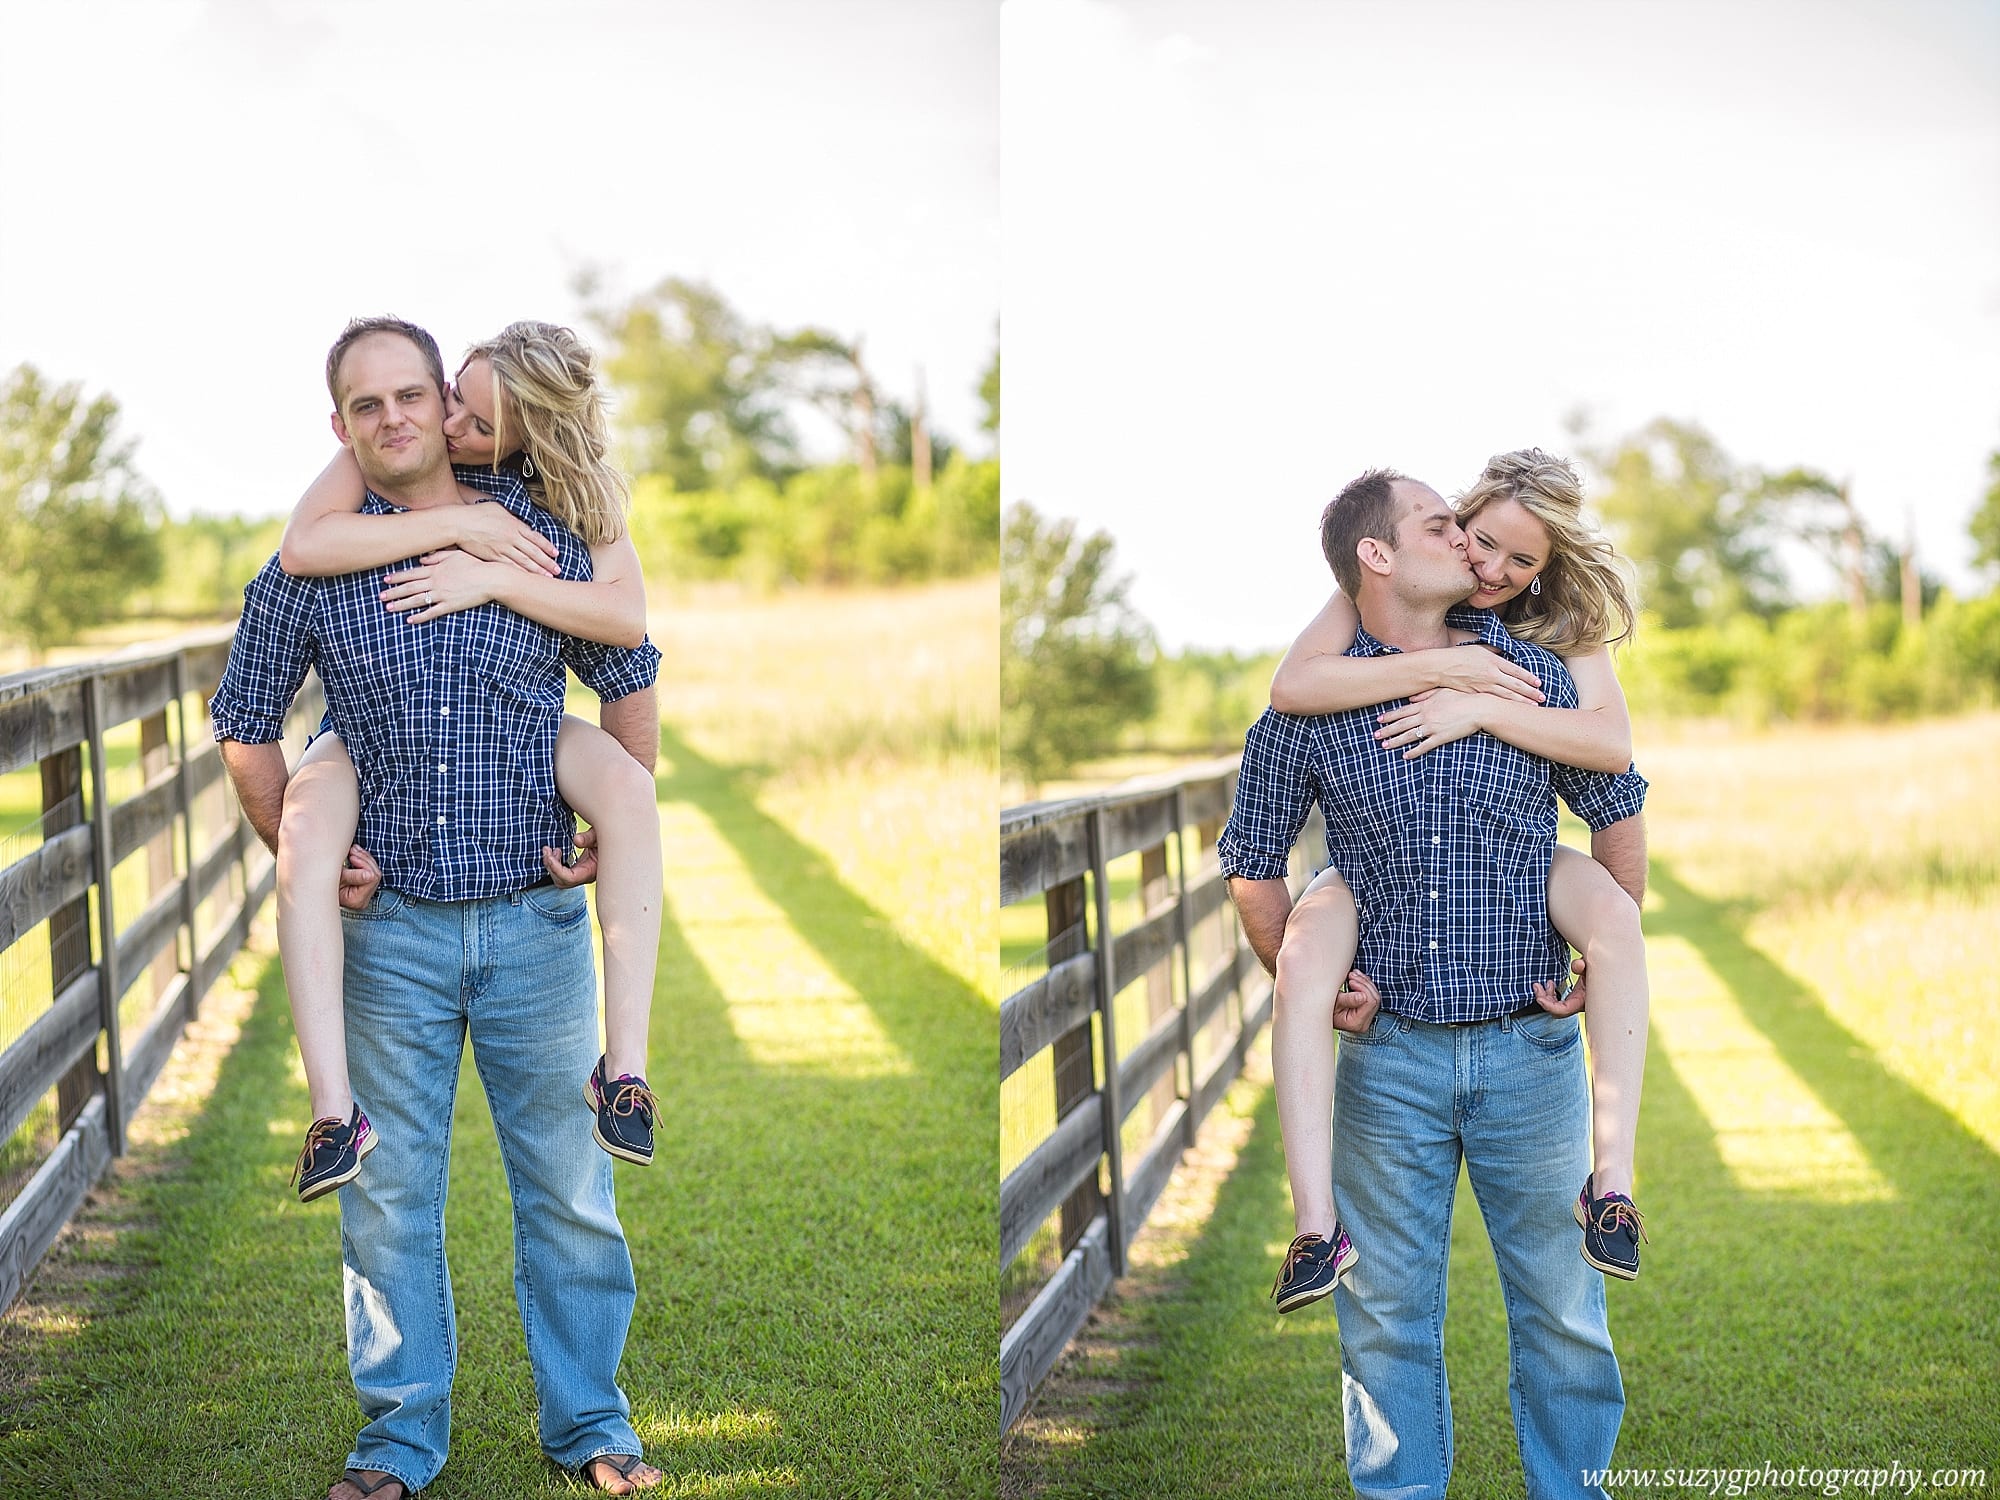 engagements-new orleans-texas-baton rouge-lake charles-suzy g-photography-suzygphotography_0018